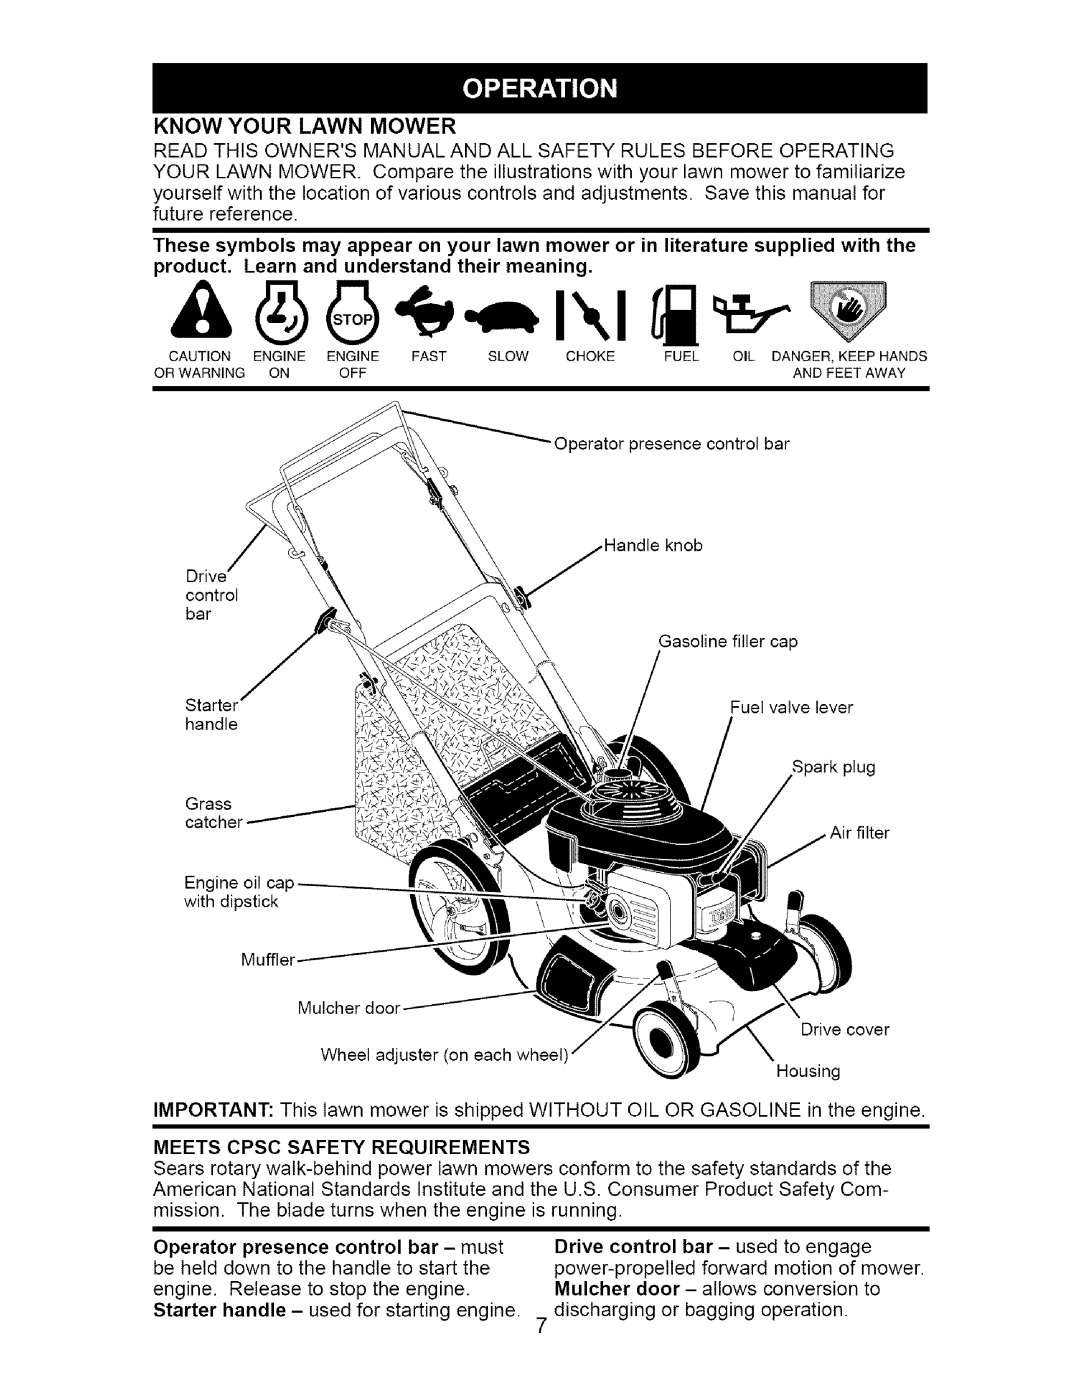 Craftsman 917.37172 Know Your Lawn Mower, product. Learn and understand their meaning, Meets Cpsc Safety Requirements 